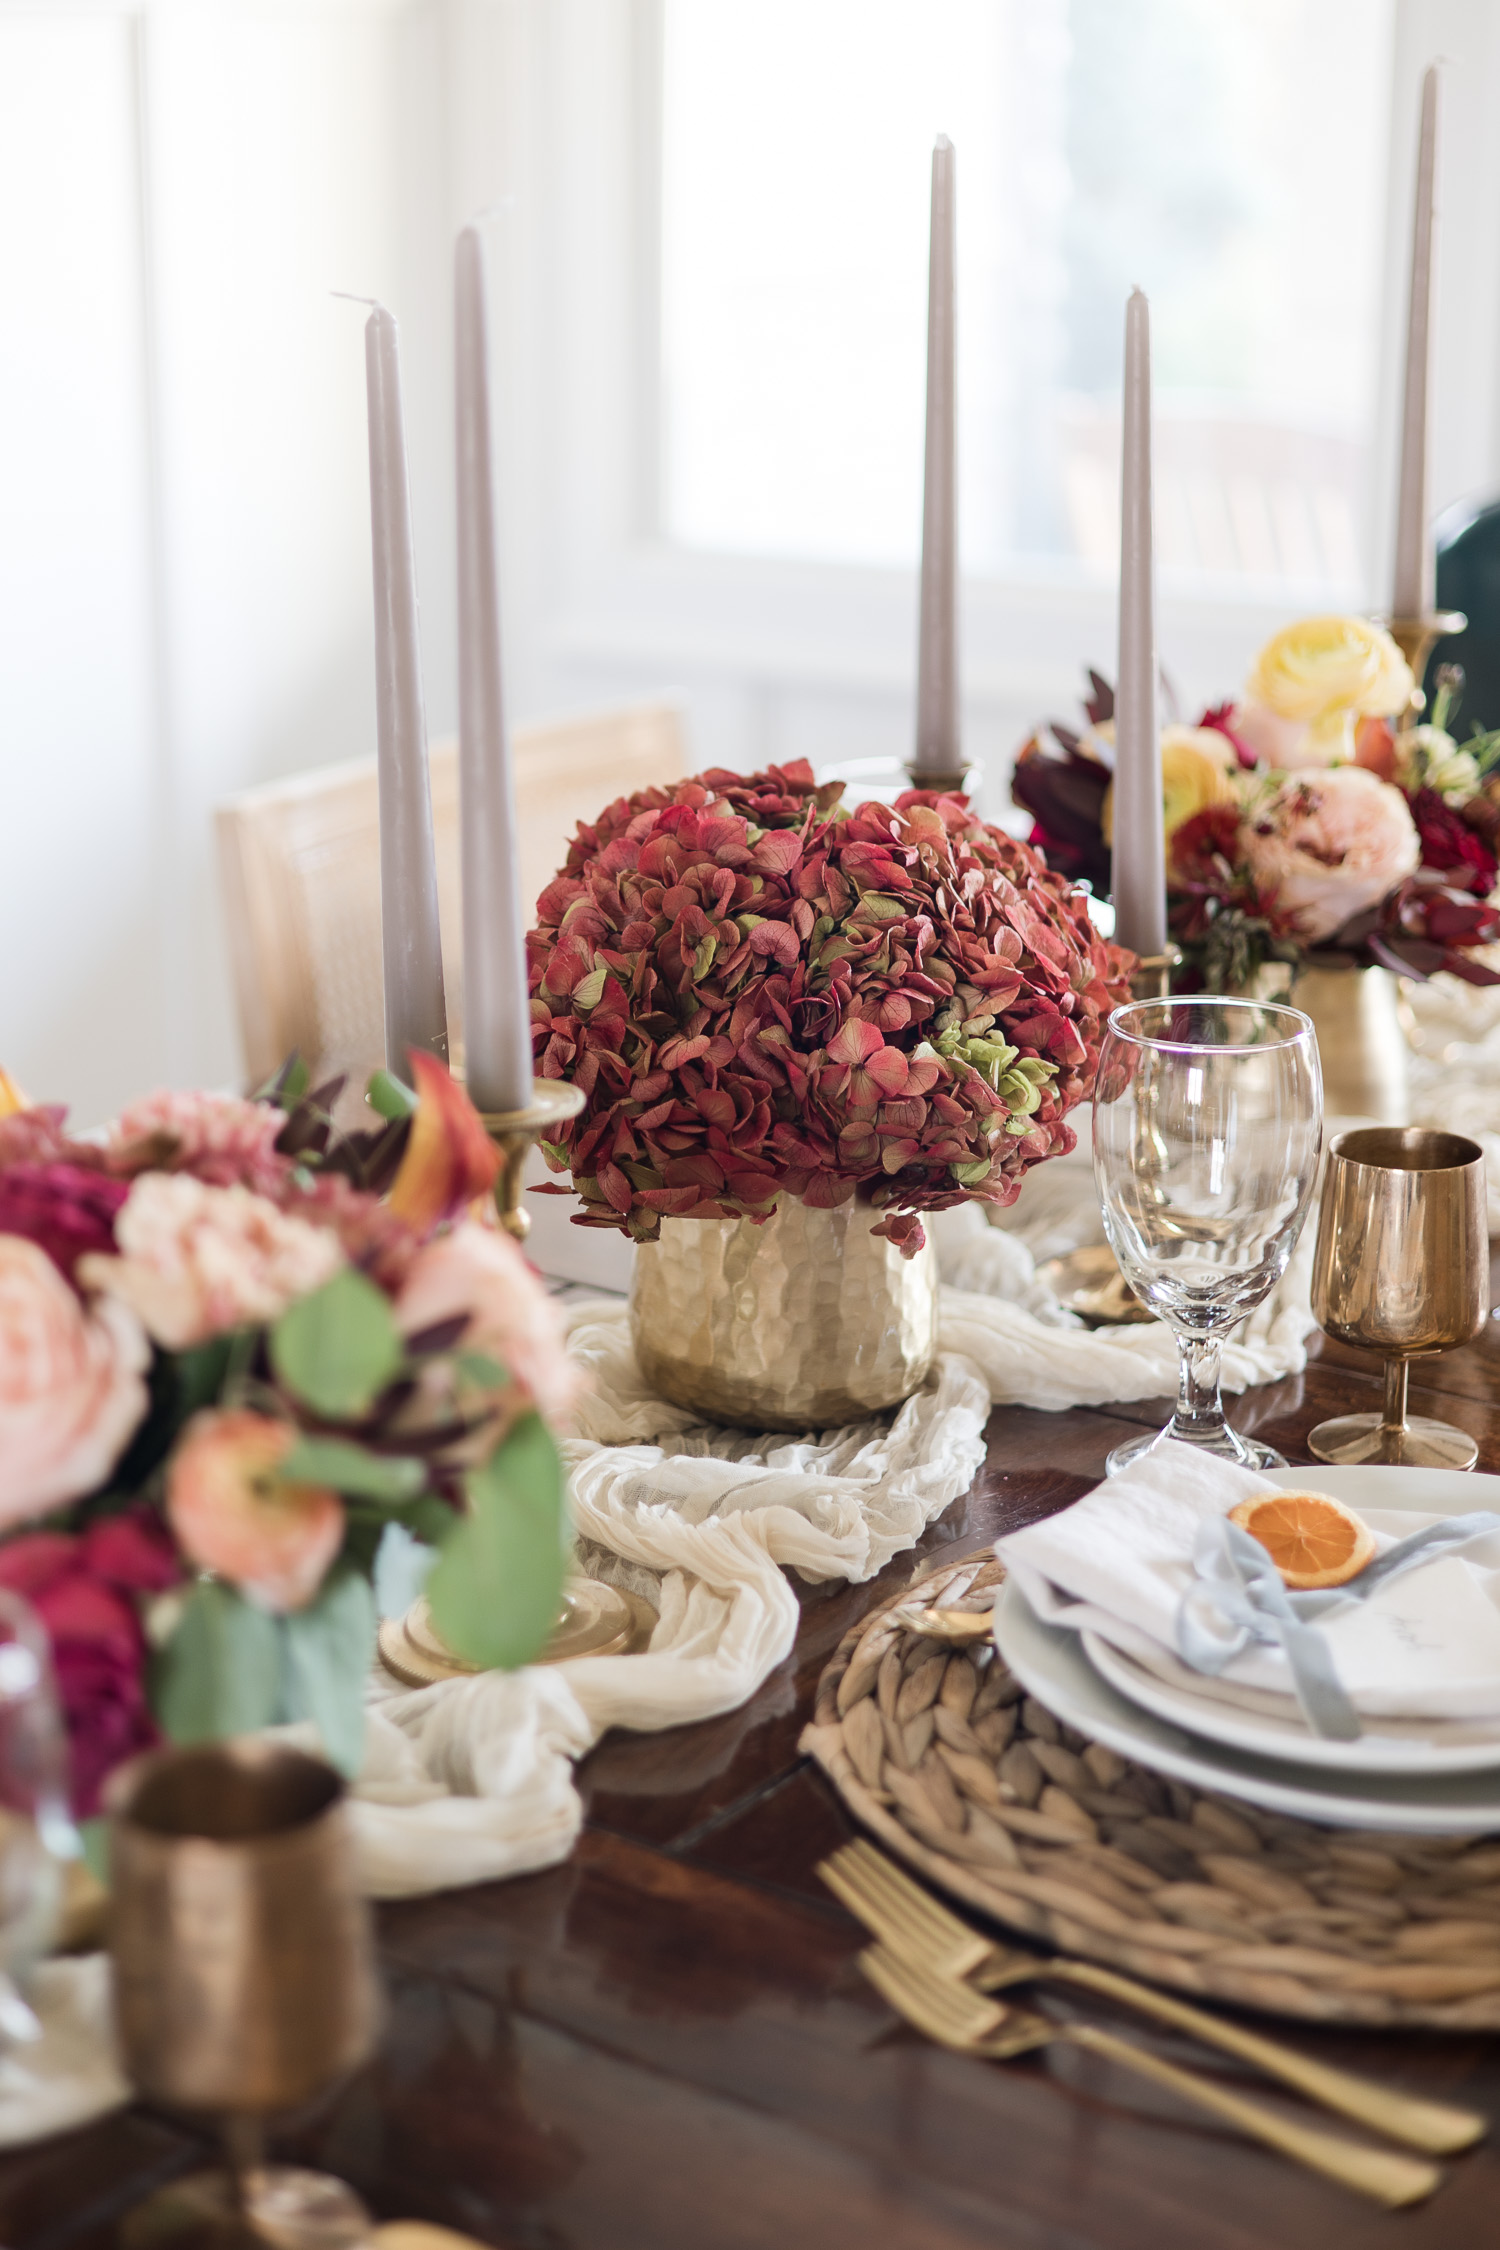 florals on thanksgiving table setting